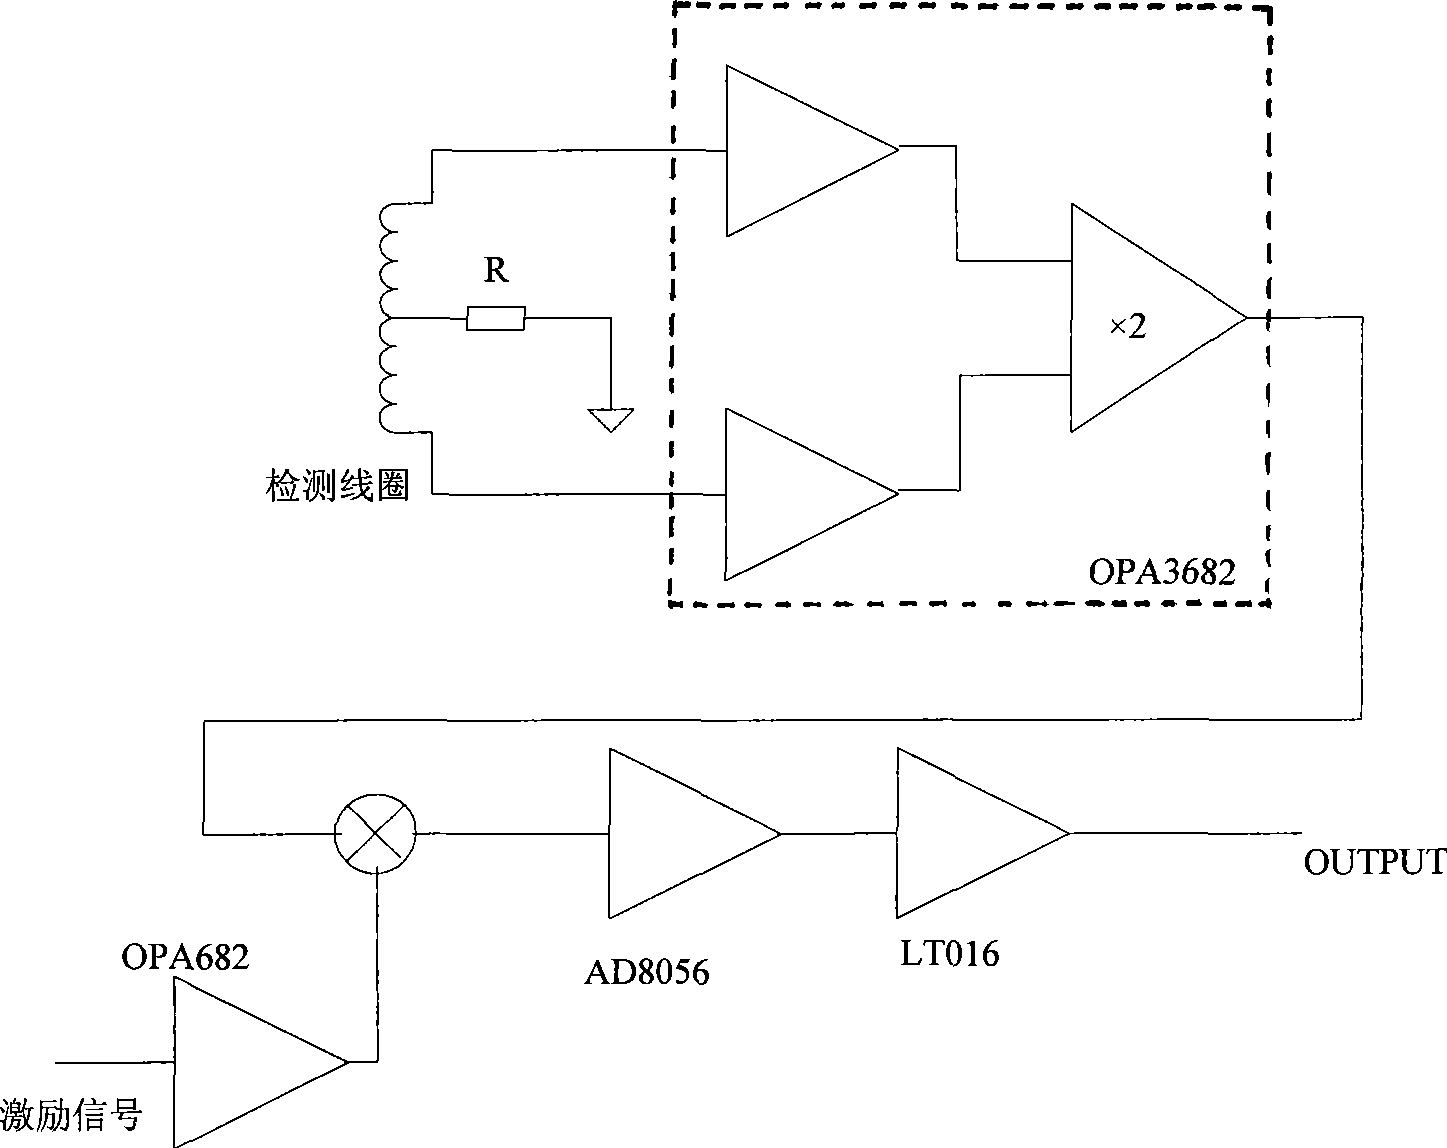 Steel wire rope damage detection apparatus and method based on electromagnetic chromatography imaging technique